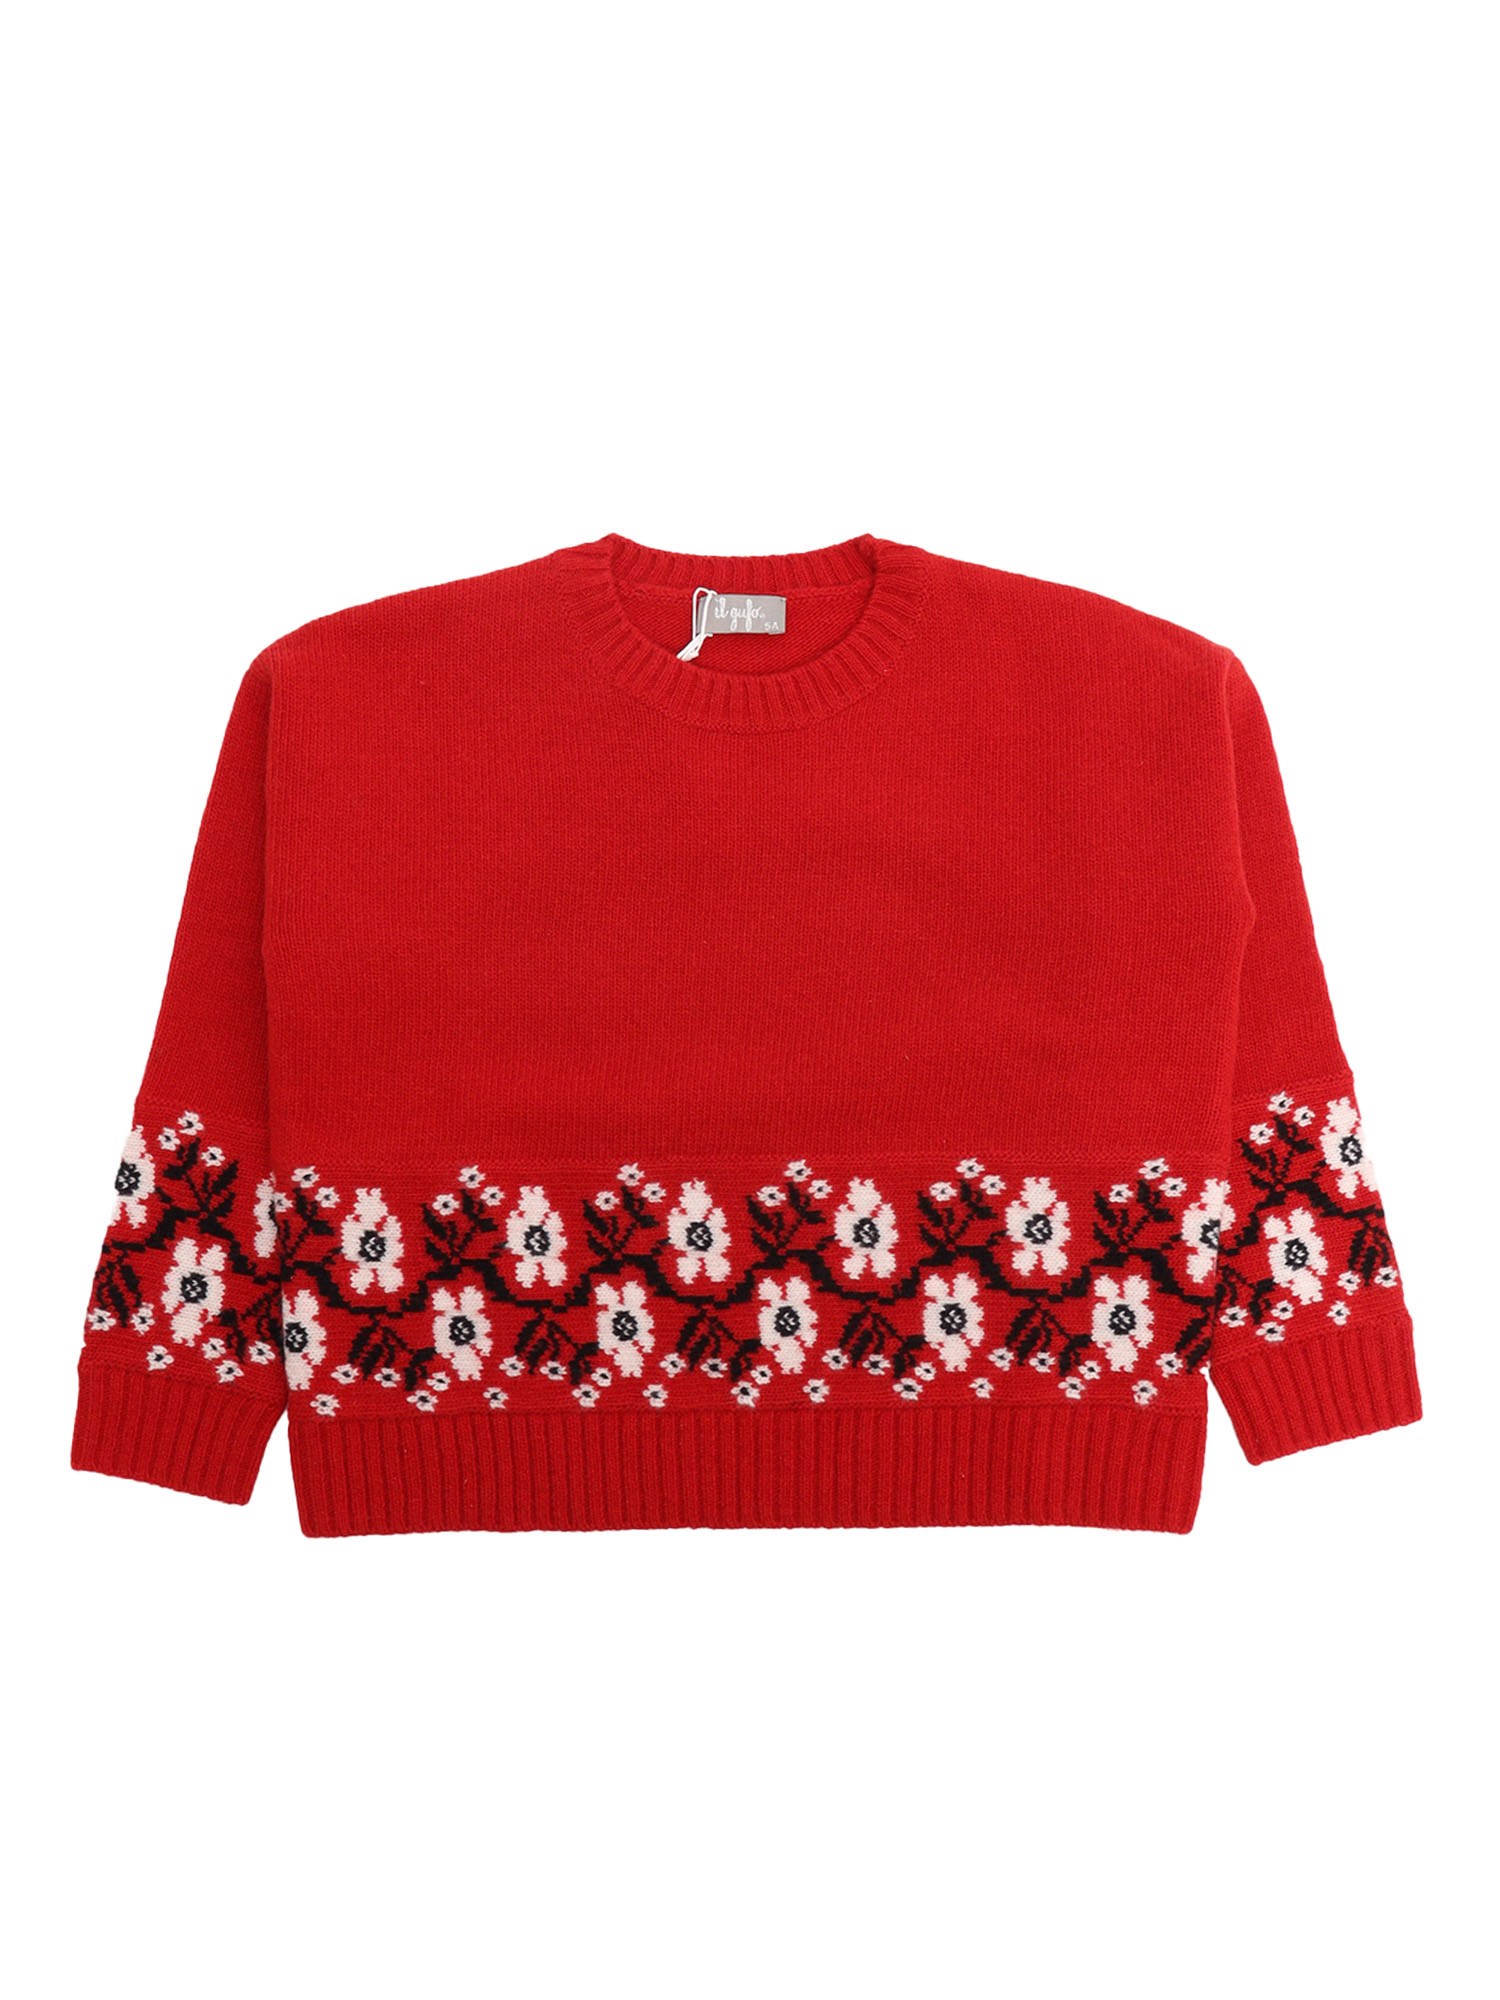 IL GUFO FLORAL INLAYS EMBELLISHED SWEATER